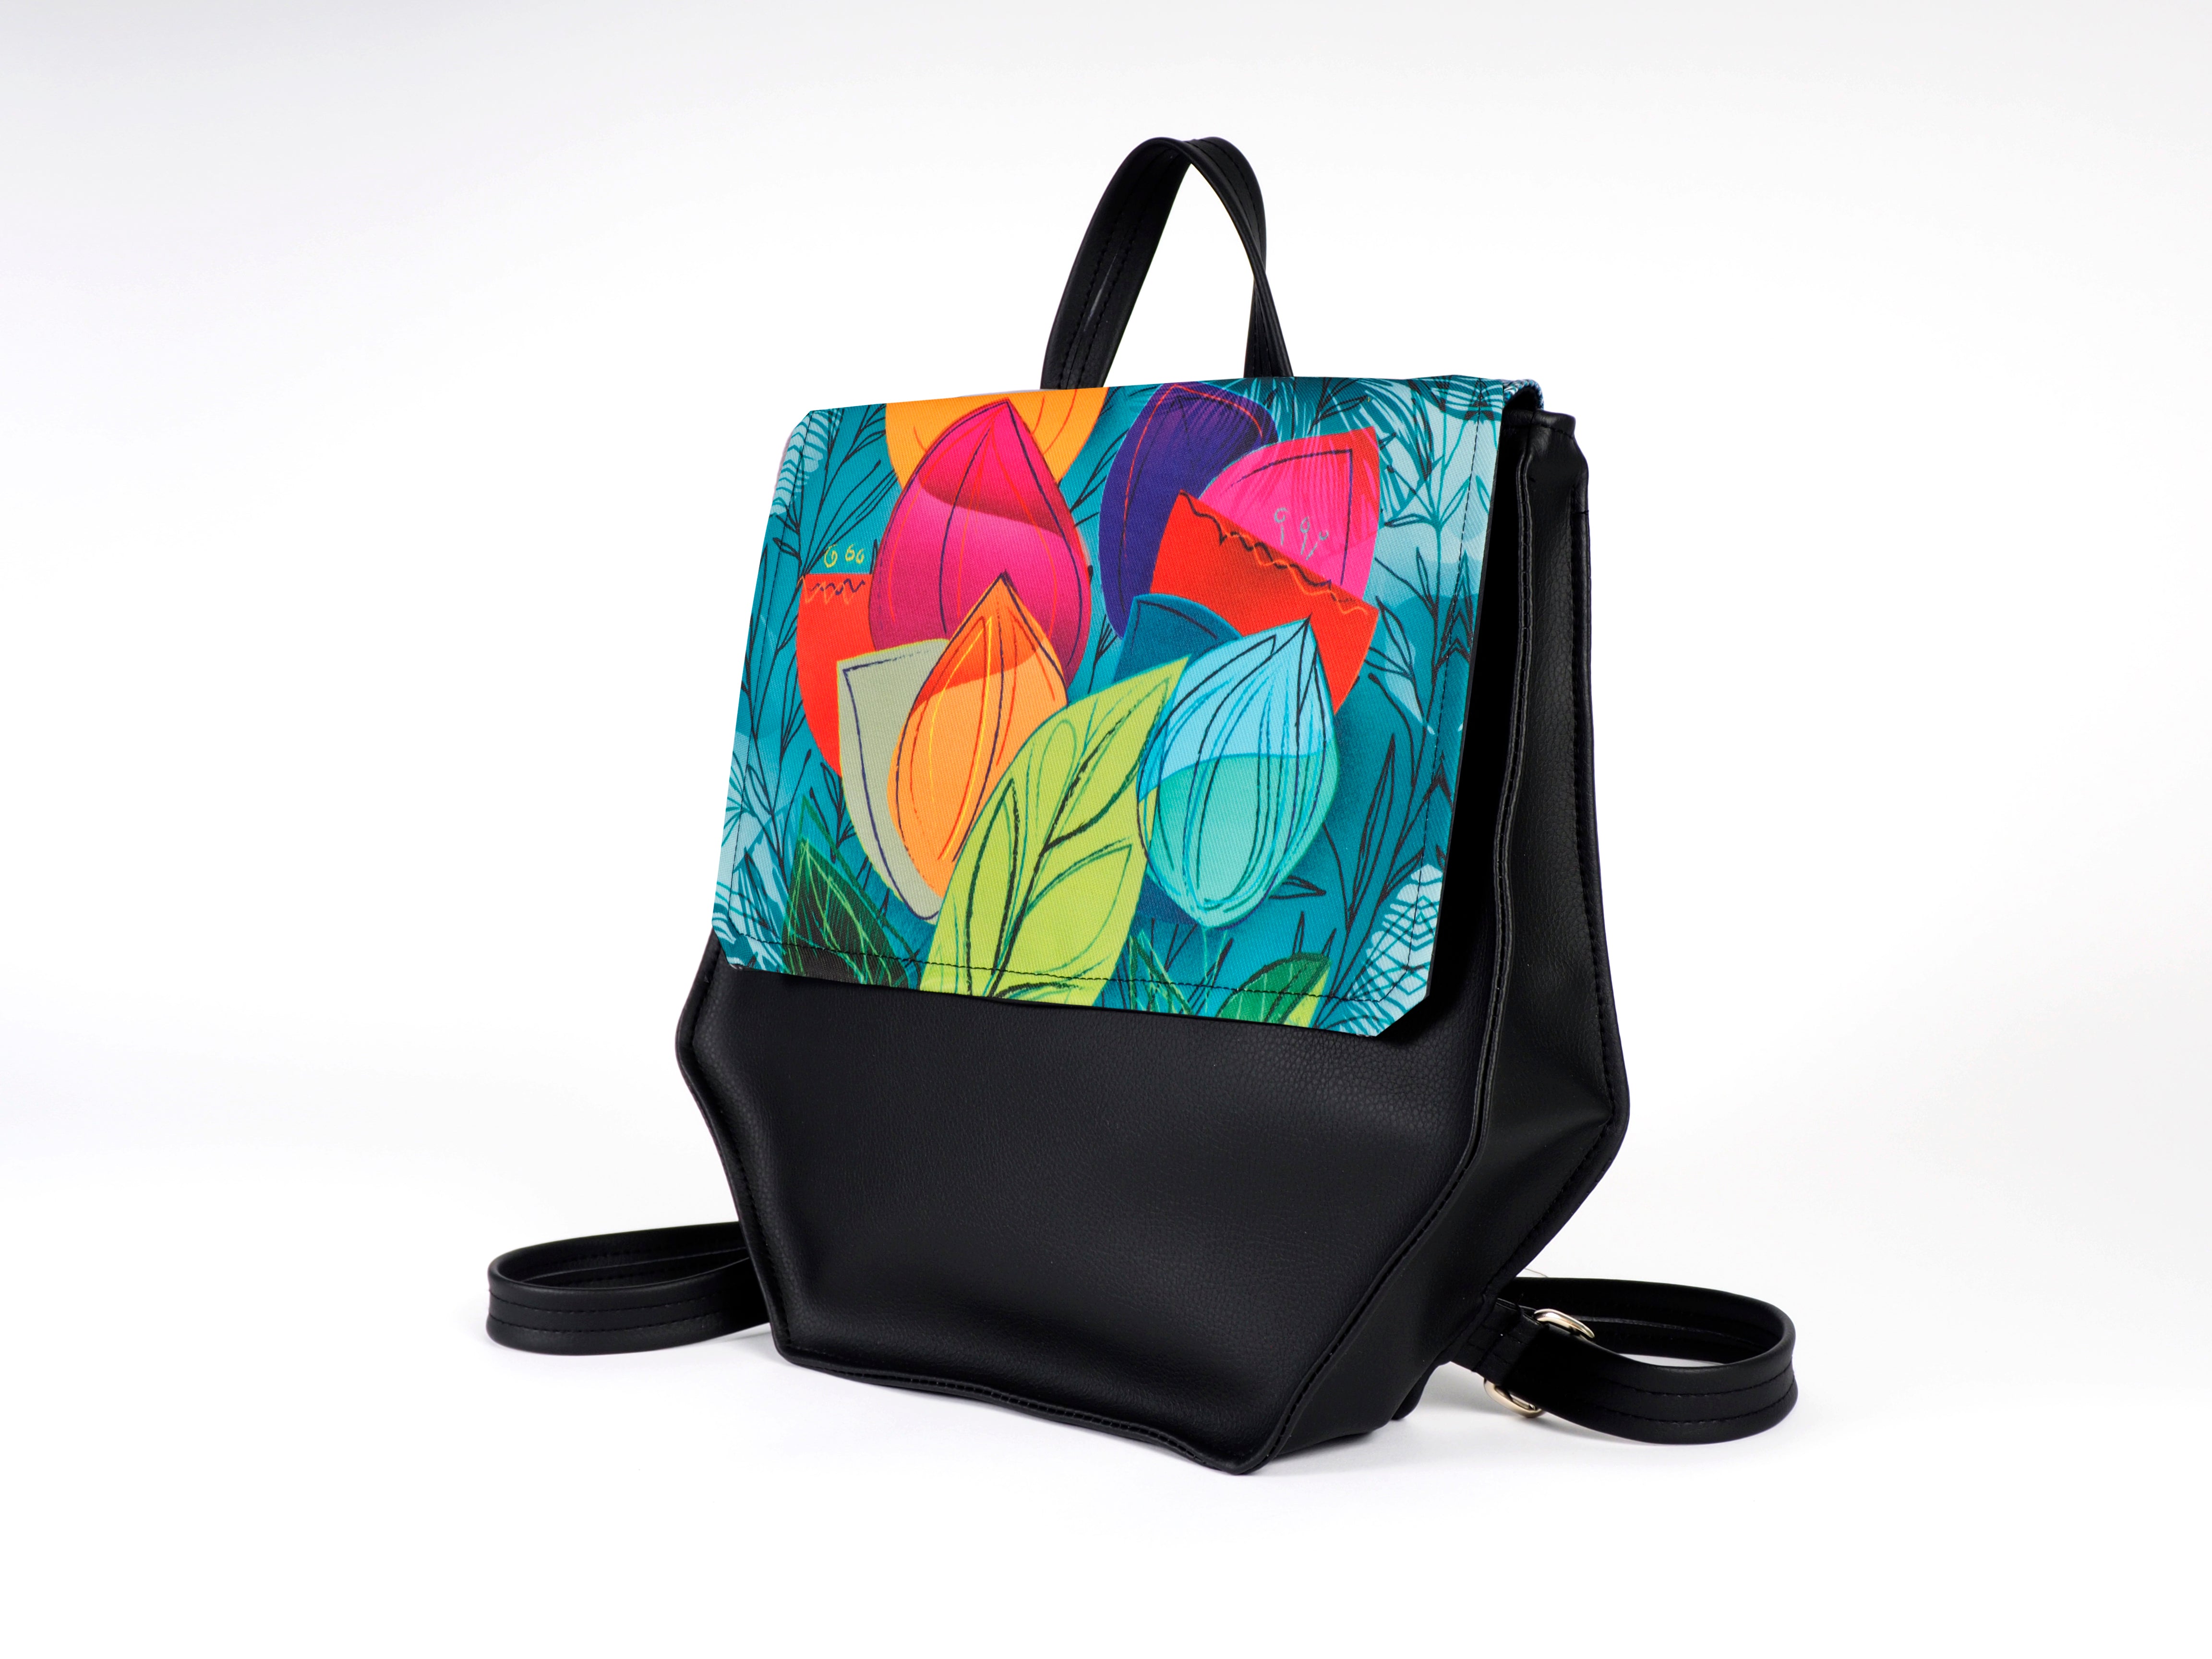 Bardo backpack honey cell - Forest flowers - Premium  from BARDO ART WORKS - Just lvabstract, Art Print, backpack, black, blue, floral, flowers, graphic, handmade, pink, vegan leather, white, woman65.00! Shop now at BARDO ART WORKS